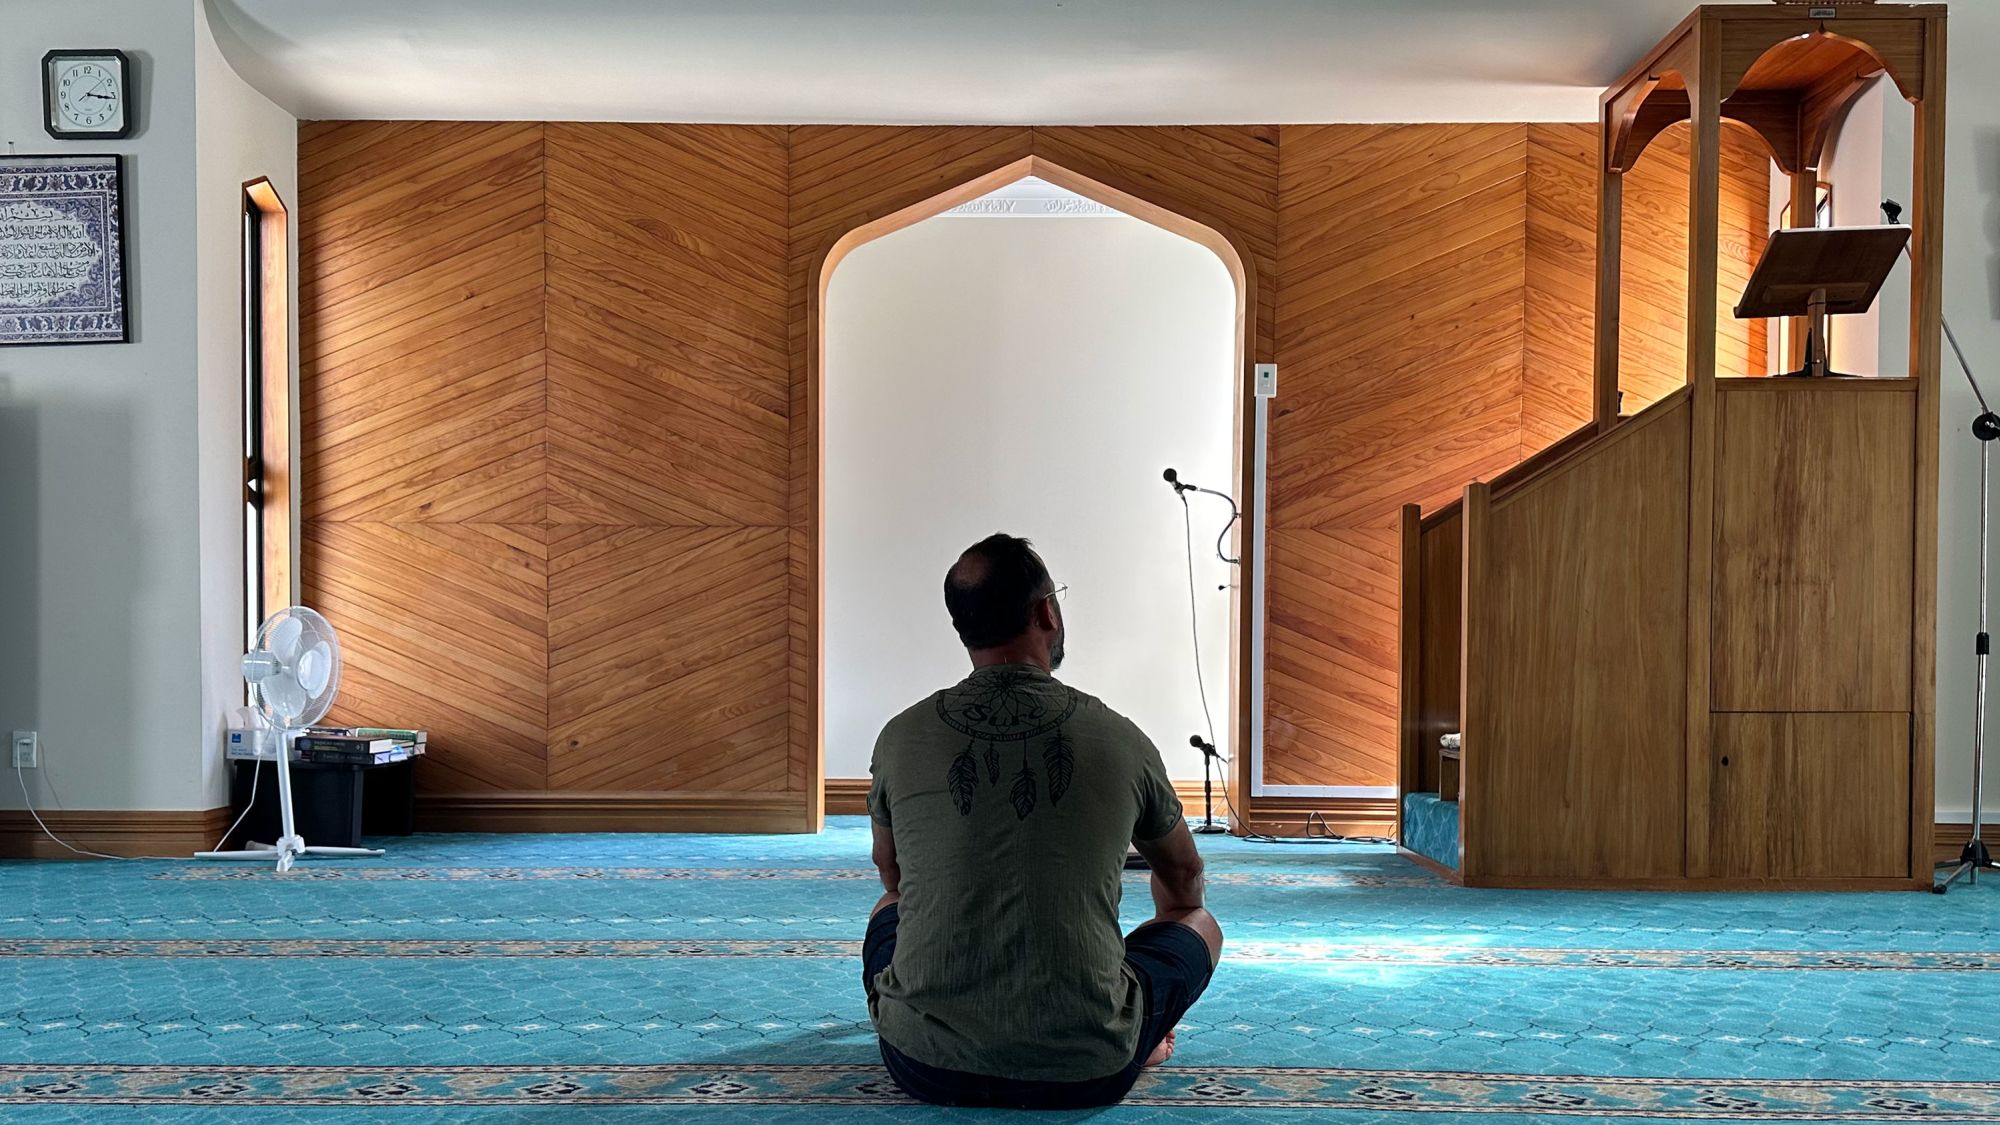 Temel Ataçocuğu sits last month in the spot where he was shot nine times by a White supremacist in 2019 at Al Noor Mosque in Christchurch, New Zealand.